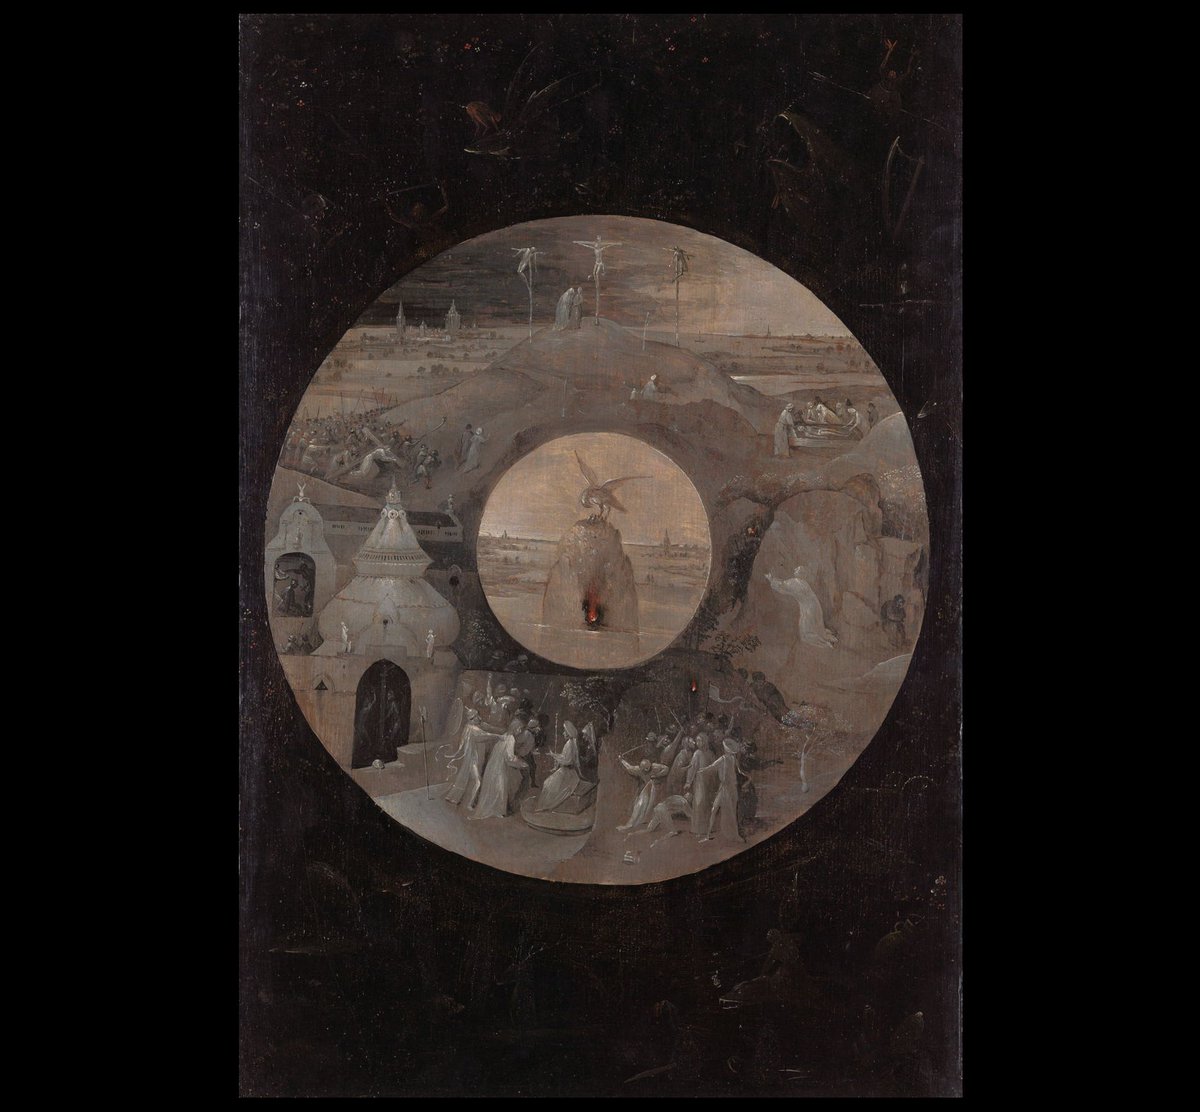 'Scenes from the Passion of Christ' - Hieronymus Bosch (c.1450-1516) 
#HieronymusBosch